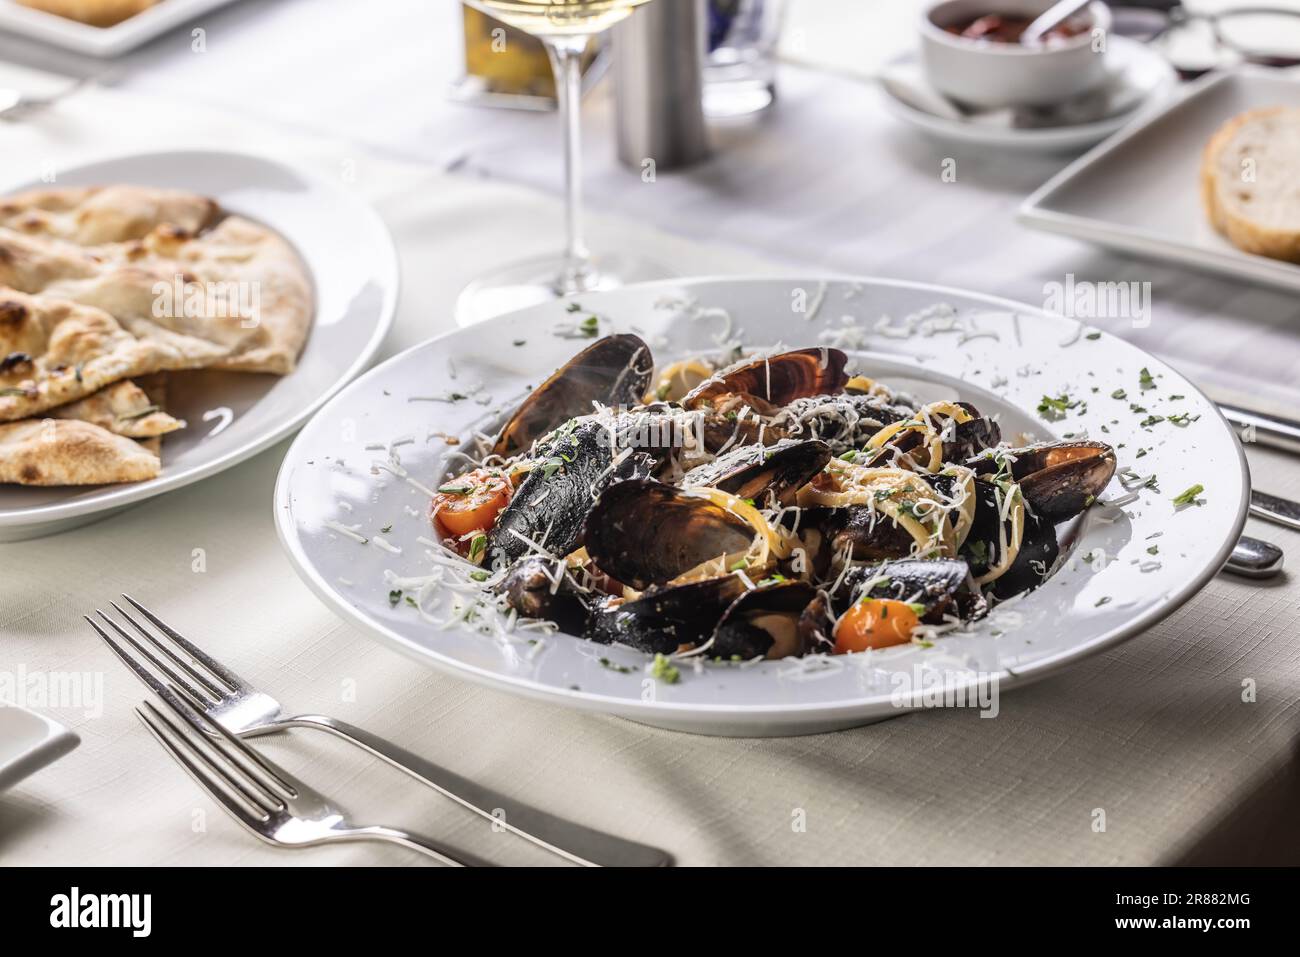 Linguine pasta with mussels and grated pecorino cheese on top served in a restaurant. Stock Photo